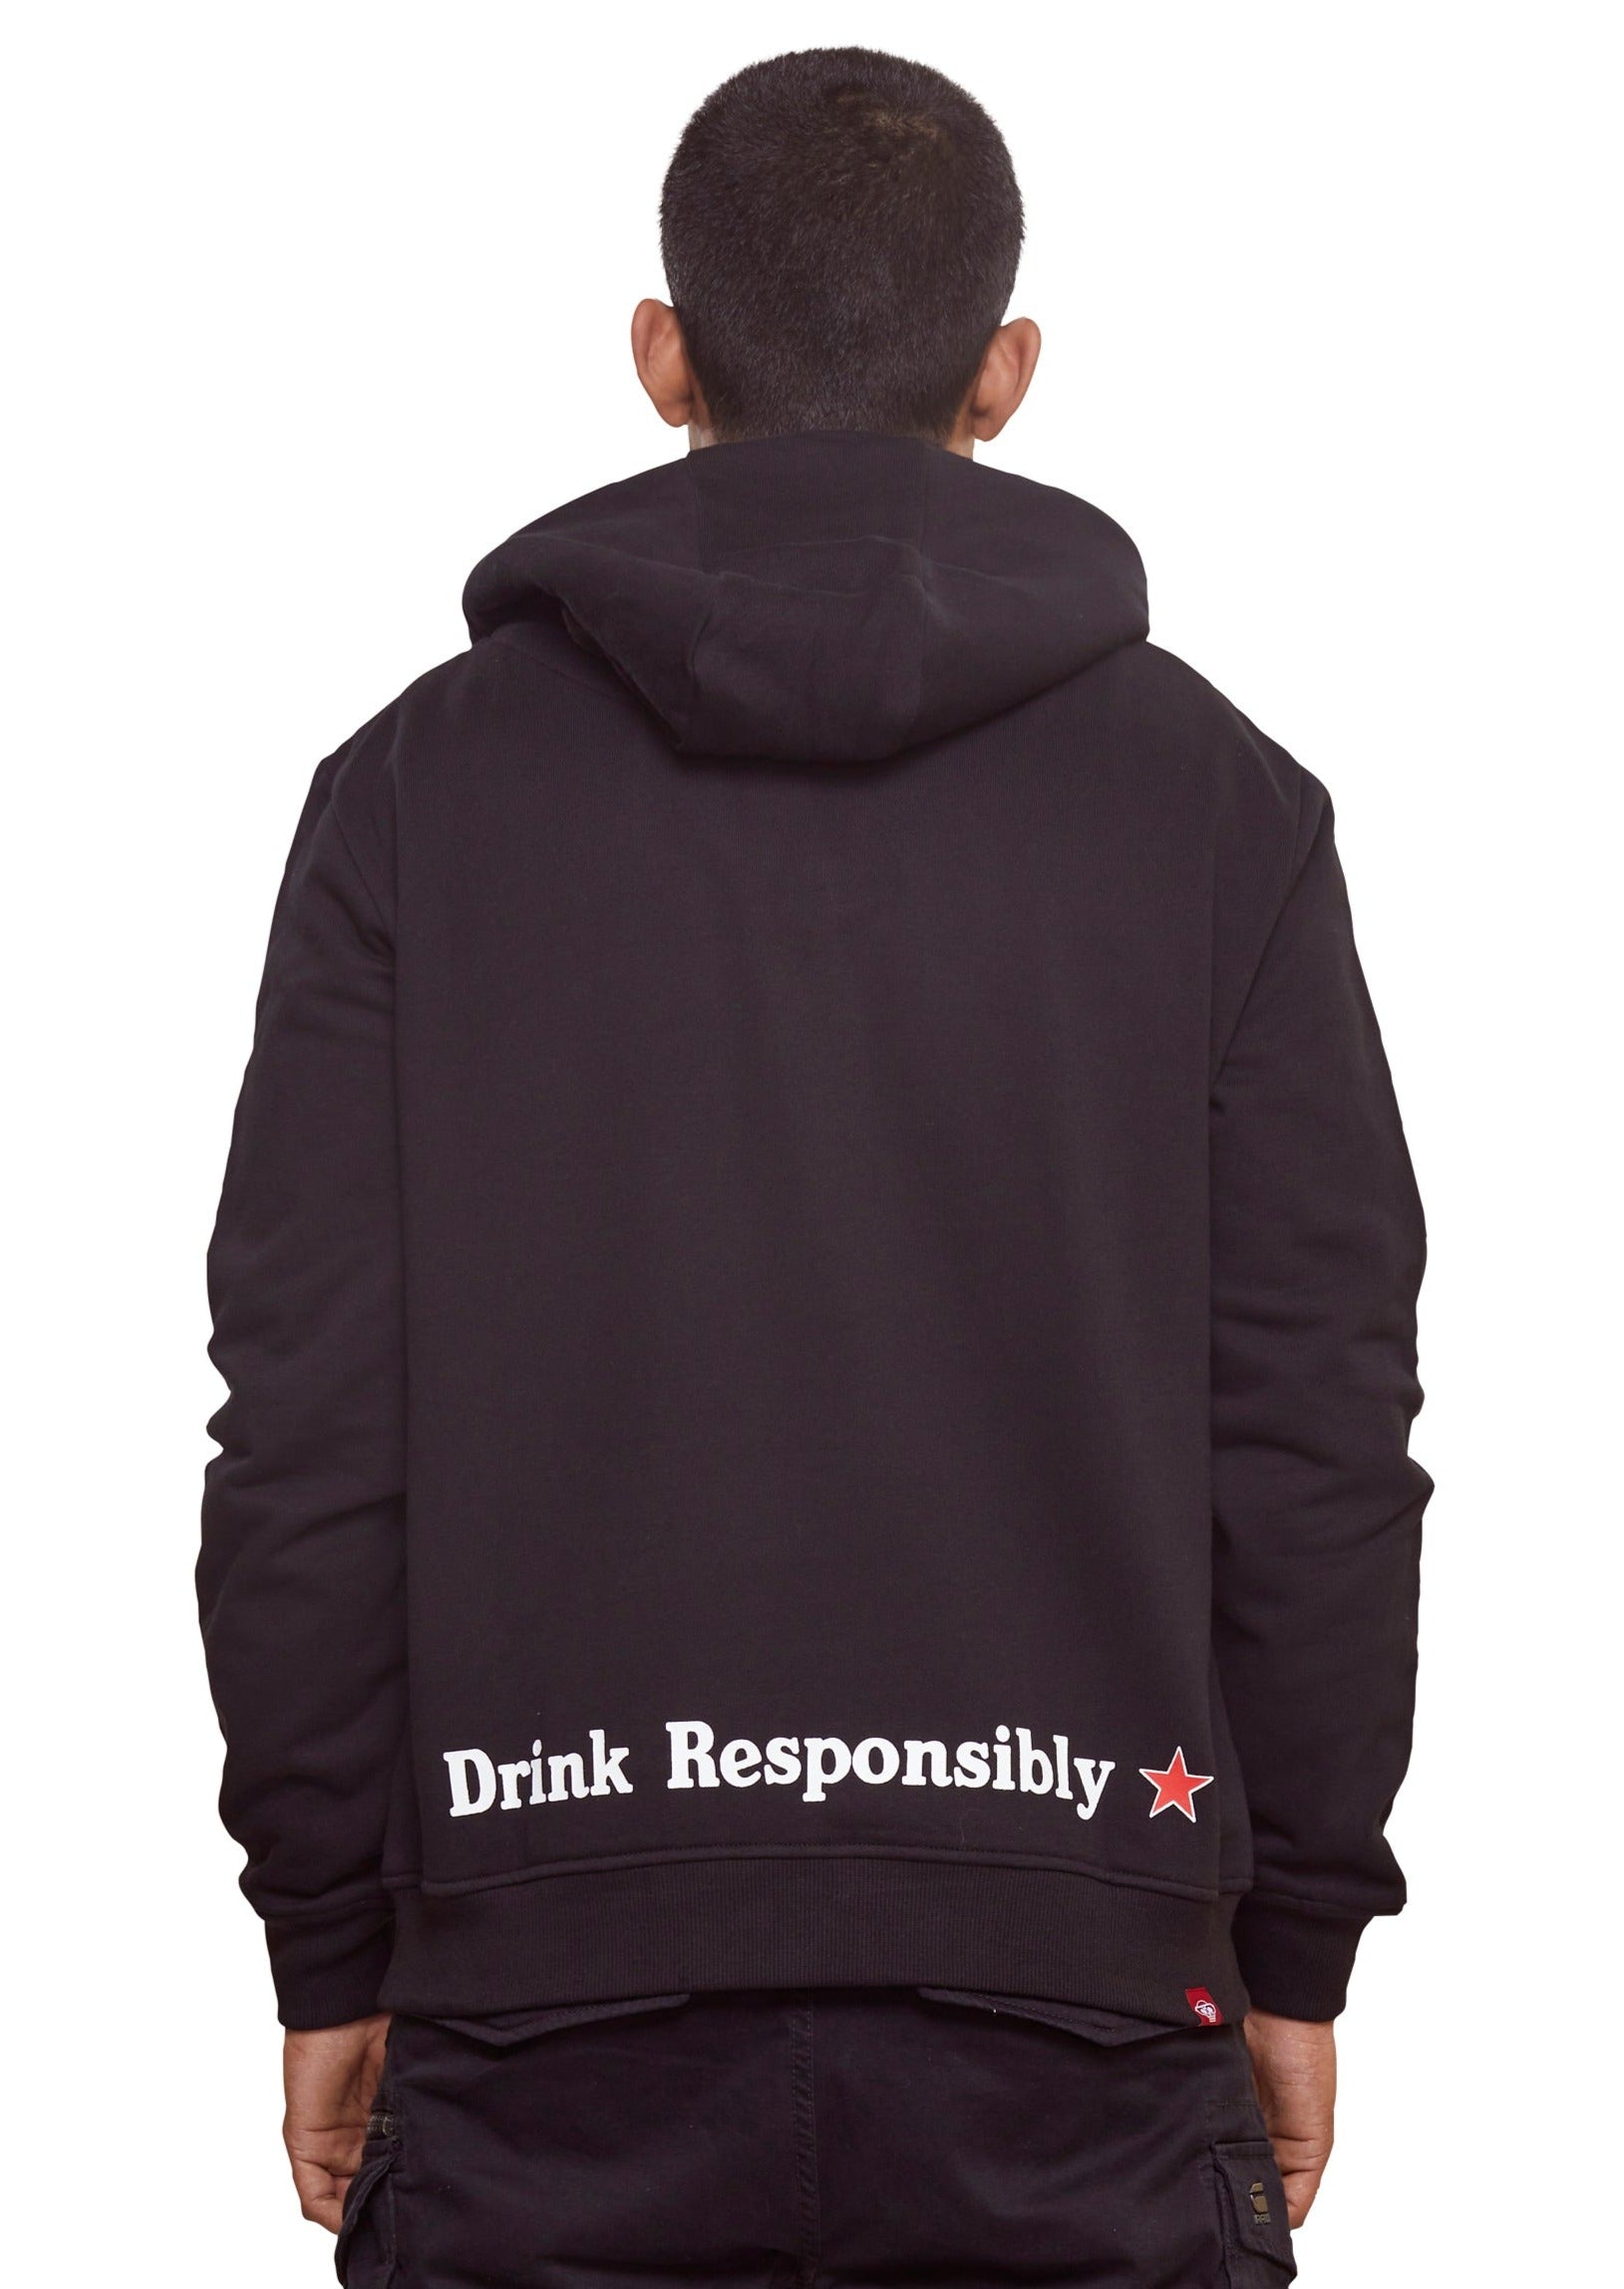 Black hoodie with draw strings and cuff sleeves that has a graphic green bottle print at the front and a slogan print at the back from the brand 8-Bit